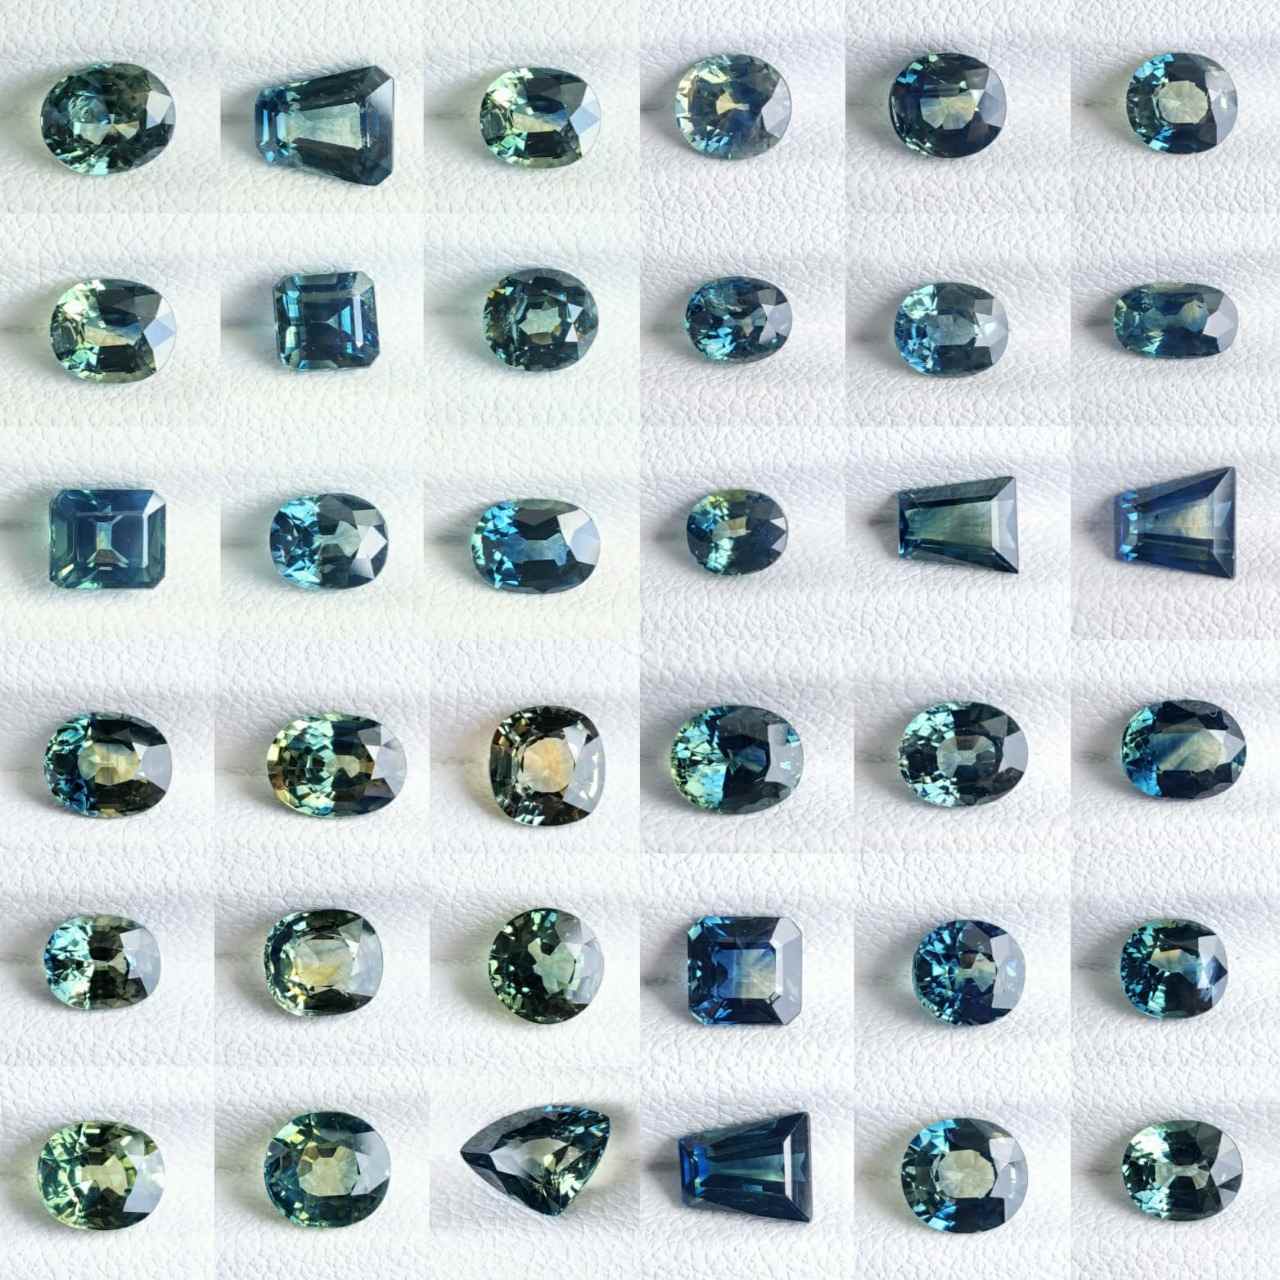 Fancy and conventional cut teal sapphires